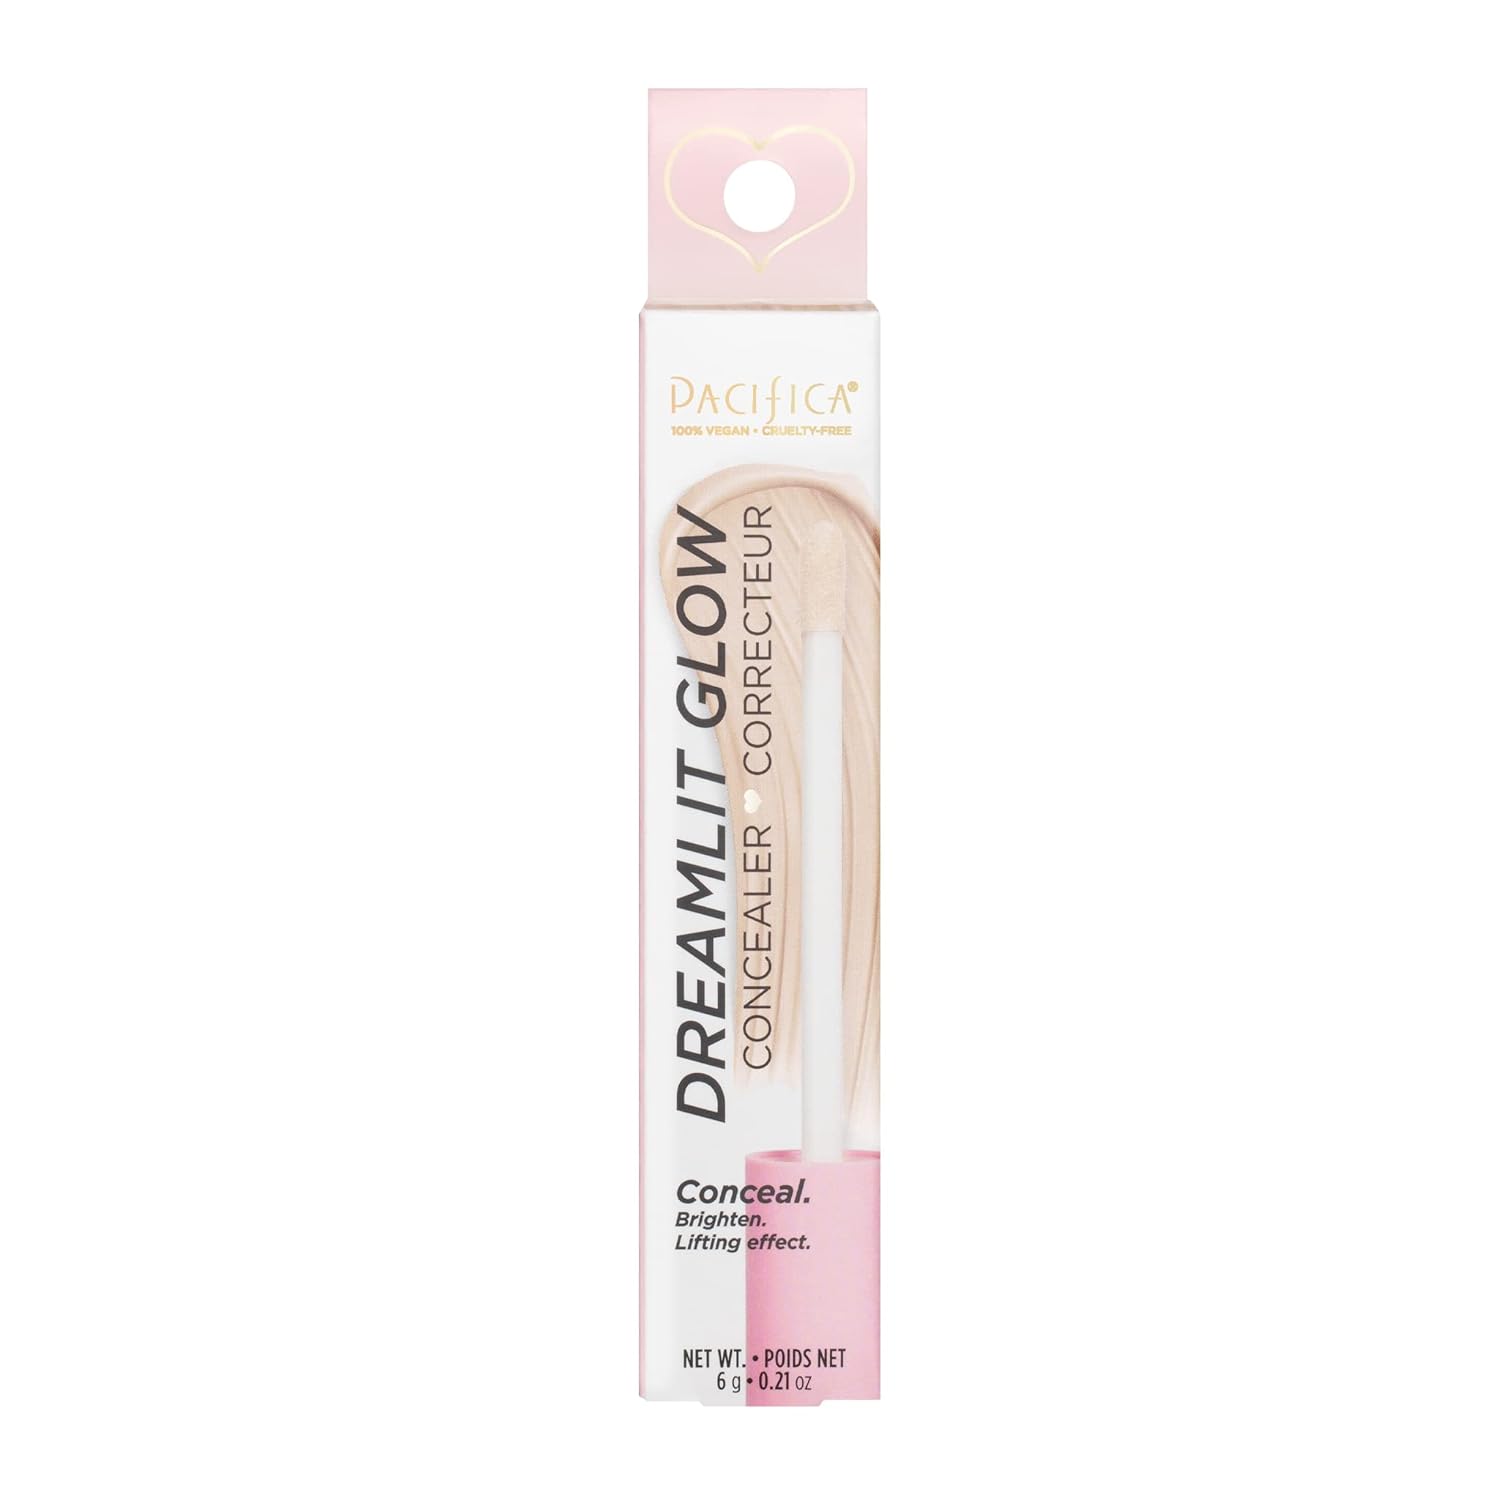 Pacifica Beauty, DreamLit Glow Concealer - Shade 11, Multi-Use Concealer, Conceals, Corrects, Covers, Puffy Eyes and Dark Circles Treatment, Plant-Based Formula, Lightweight, Vegan, Dark Brown : Beauty & Personal Care